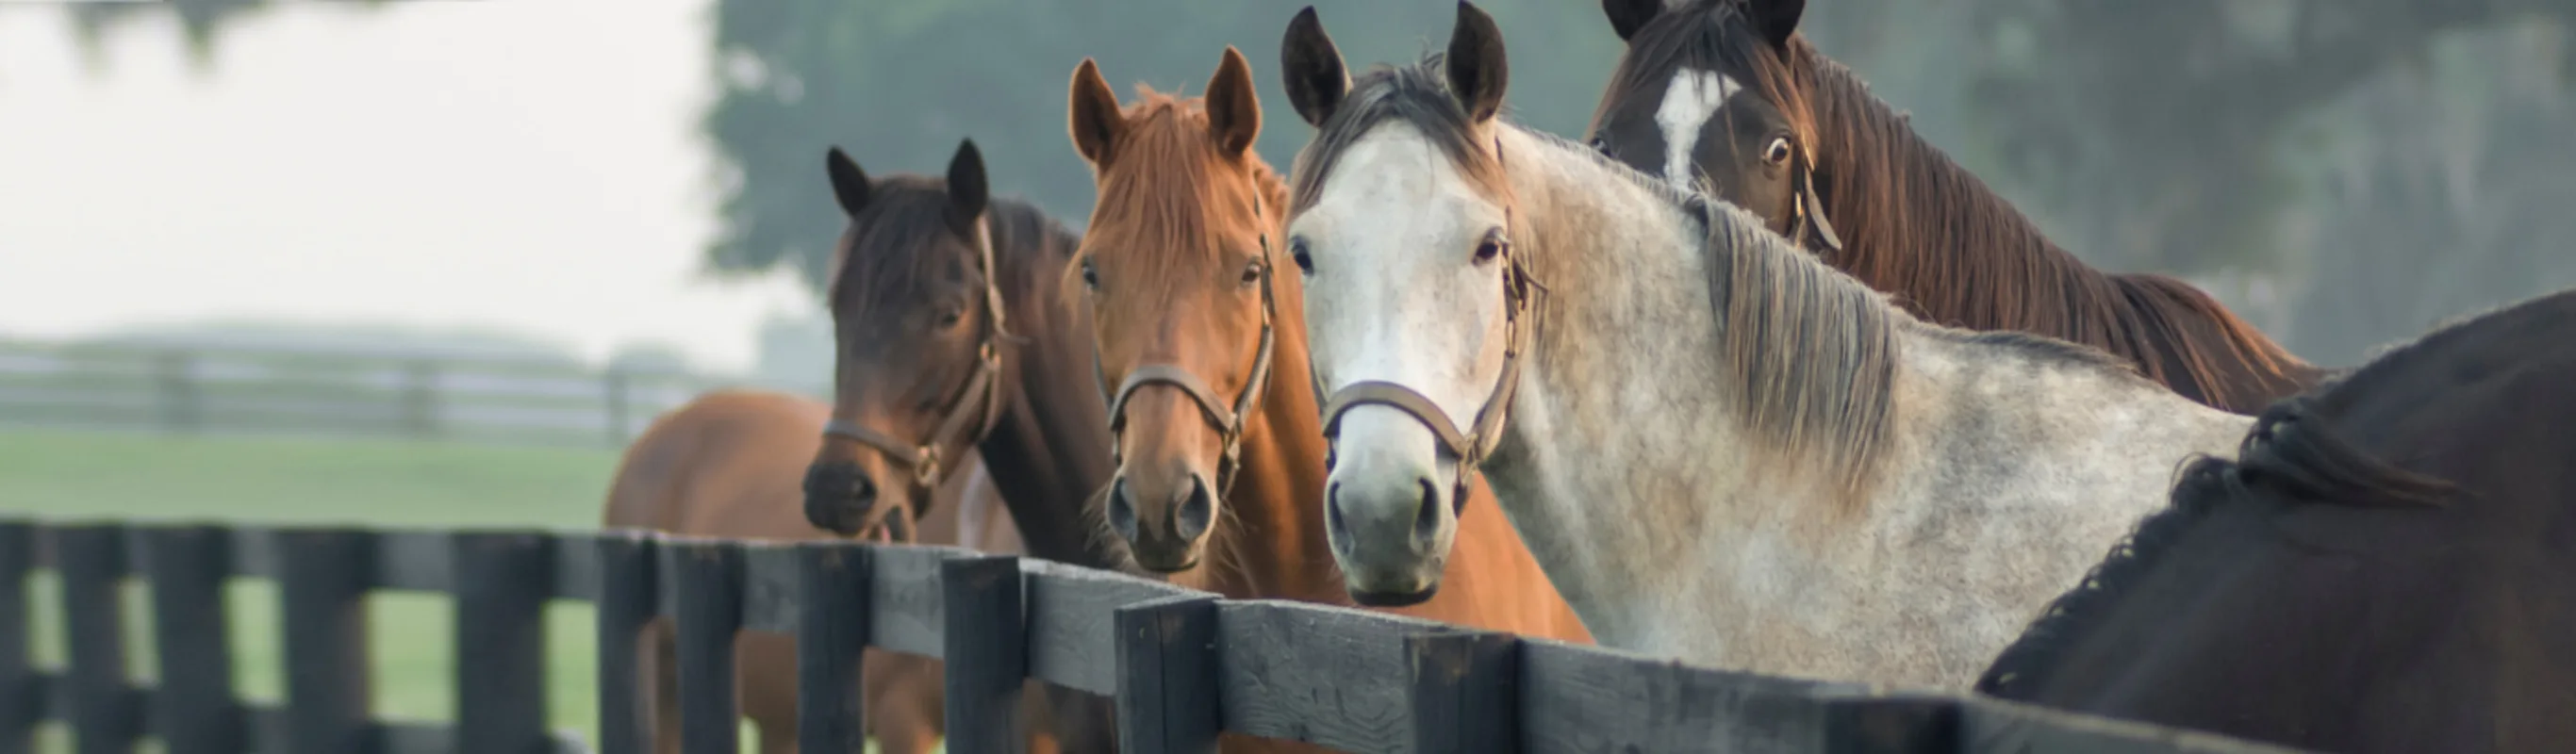 Five Horses Standing Near a Wooden Fence